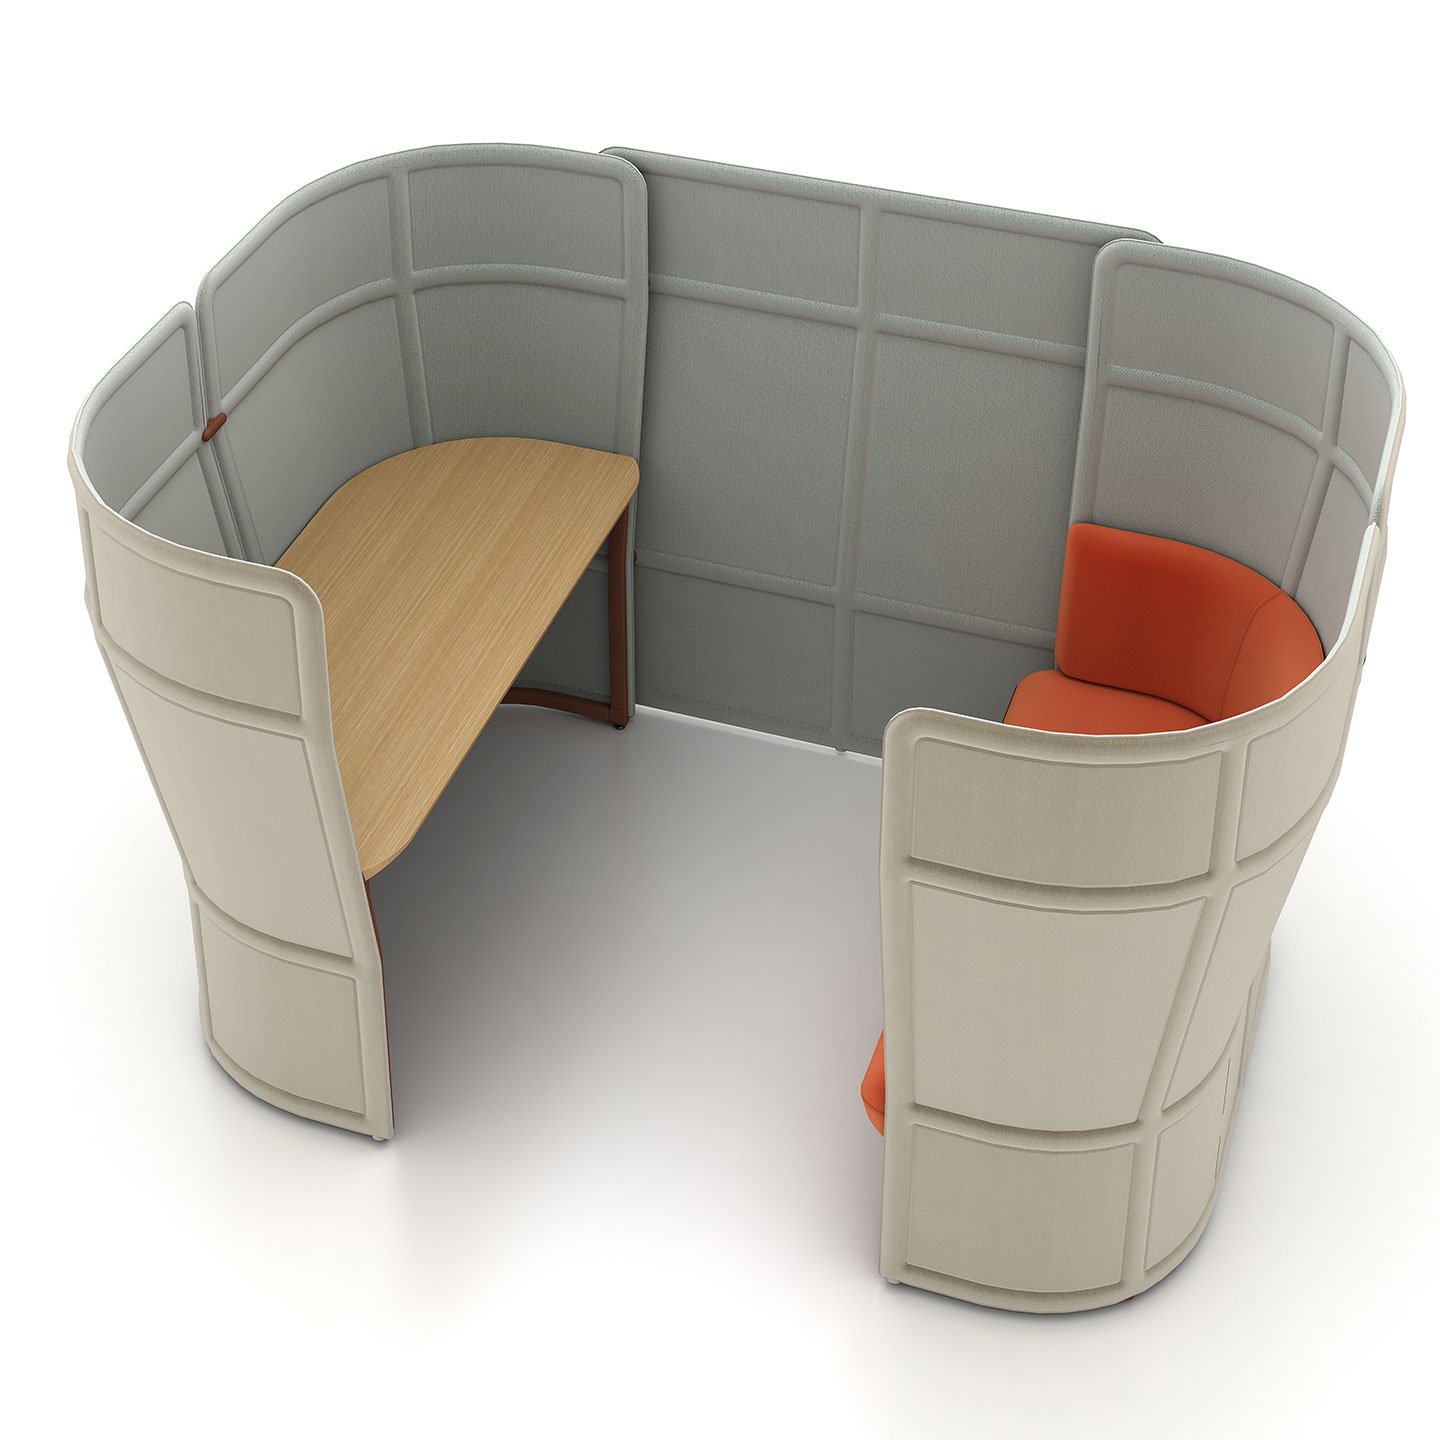 Haworth Openest Privacy Booth in grey color with laminate desk and orange seating